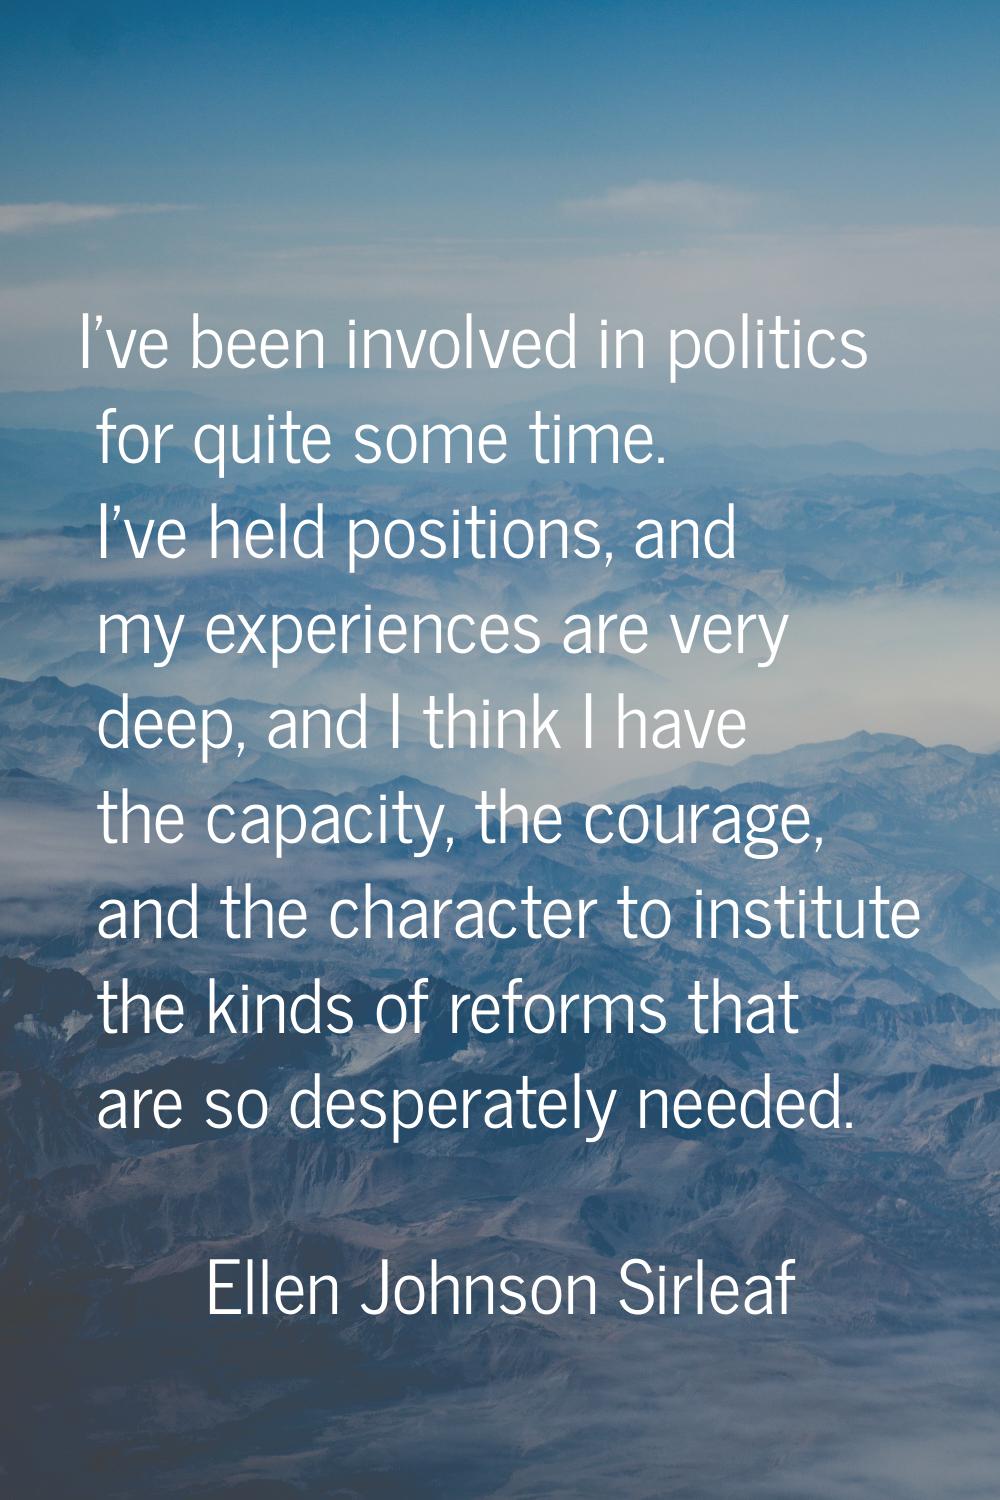 I've been involved in politics for quite some time. I've held positions, and my experiences are ver